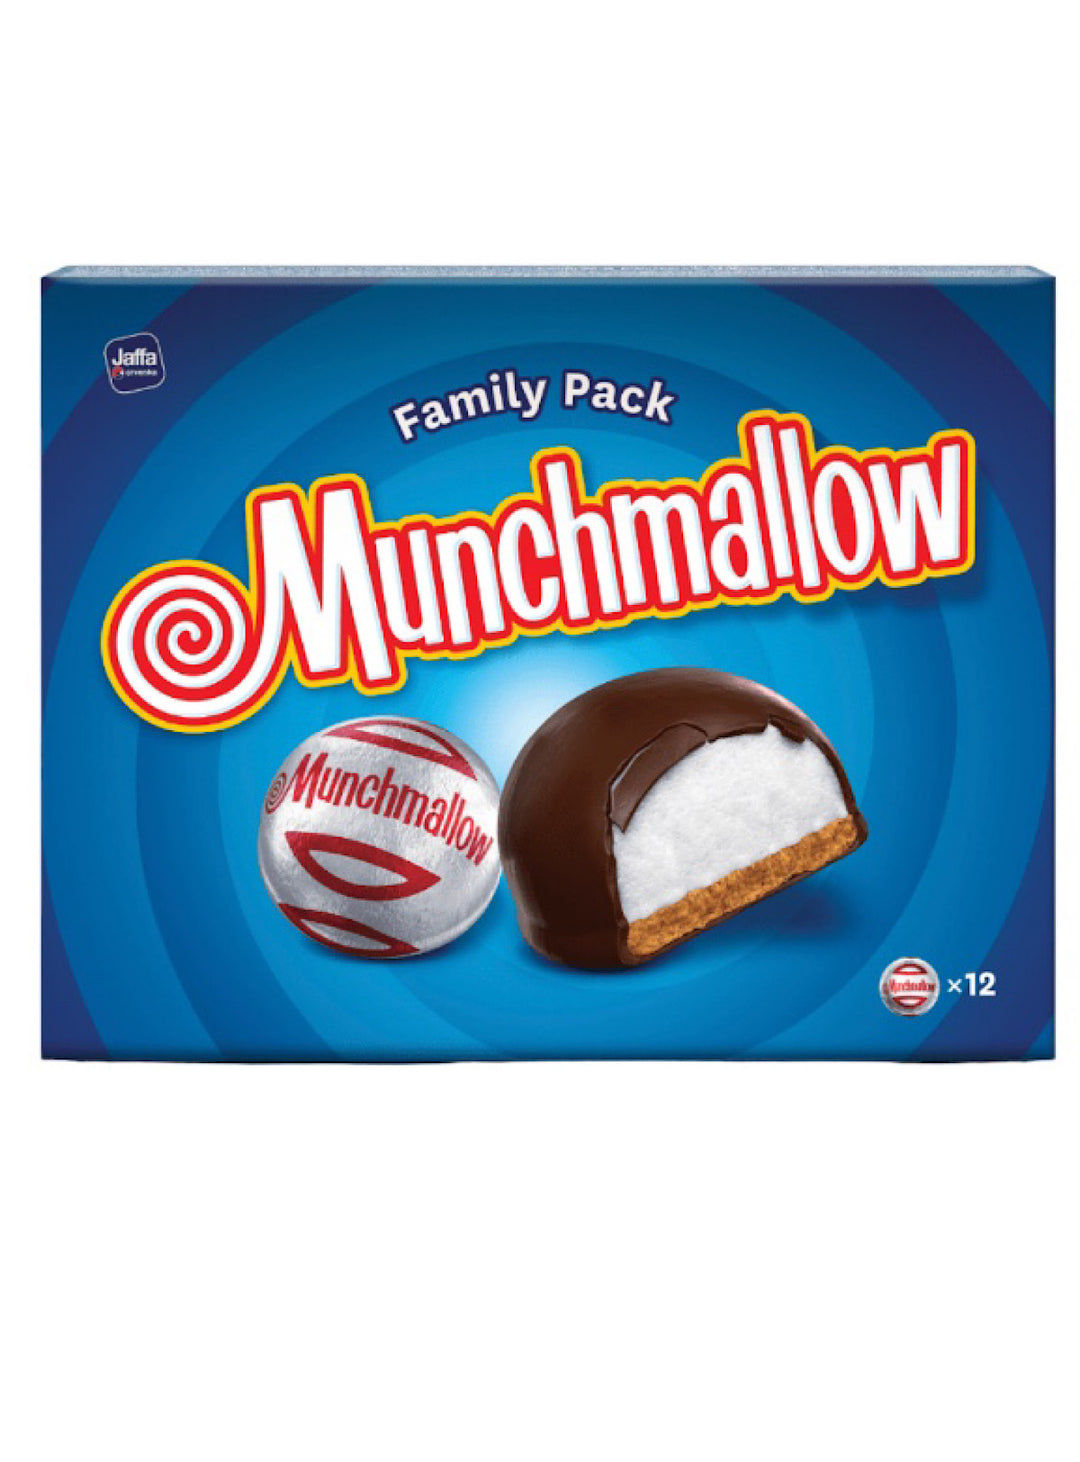 Munchmallow Marshmallow Cookies - Jaffa - Family Pack 210g